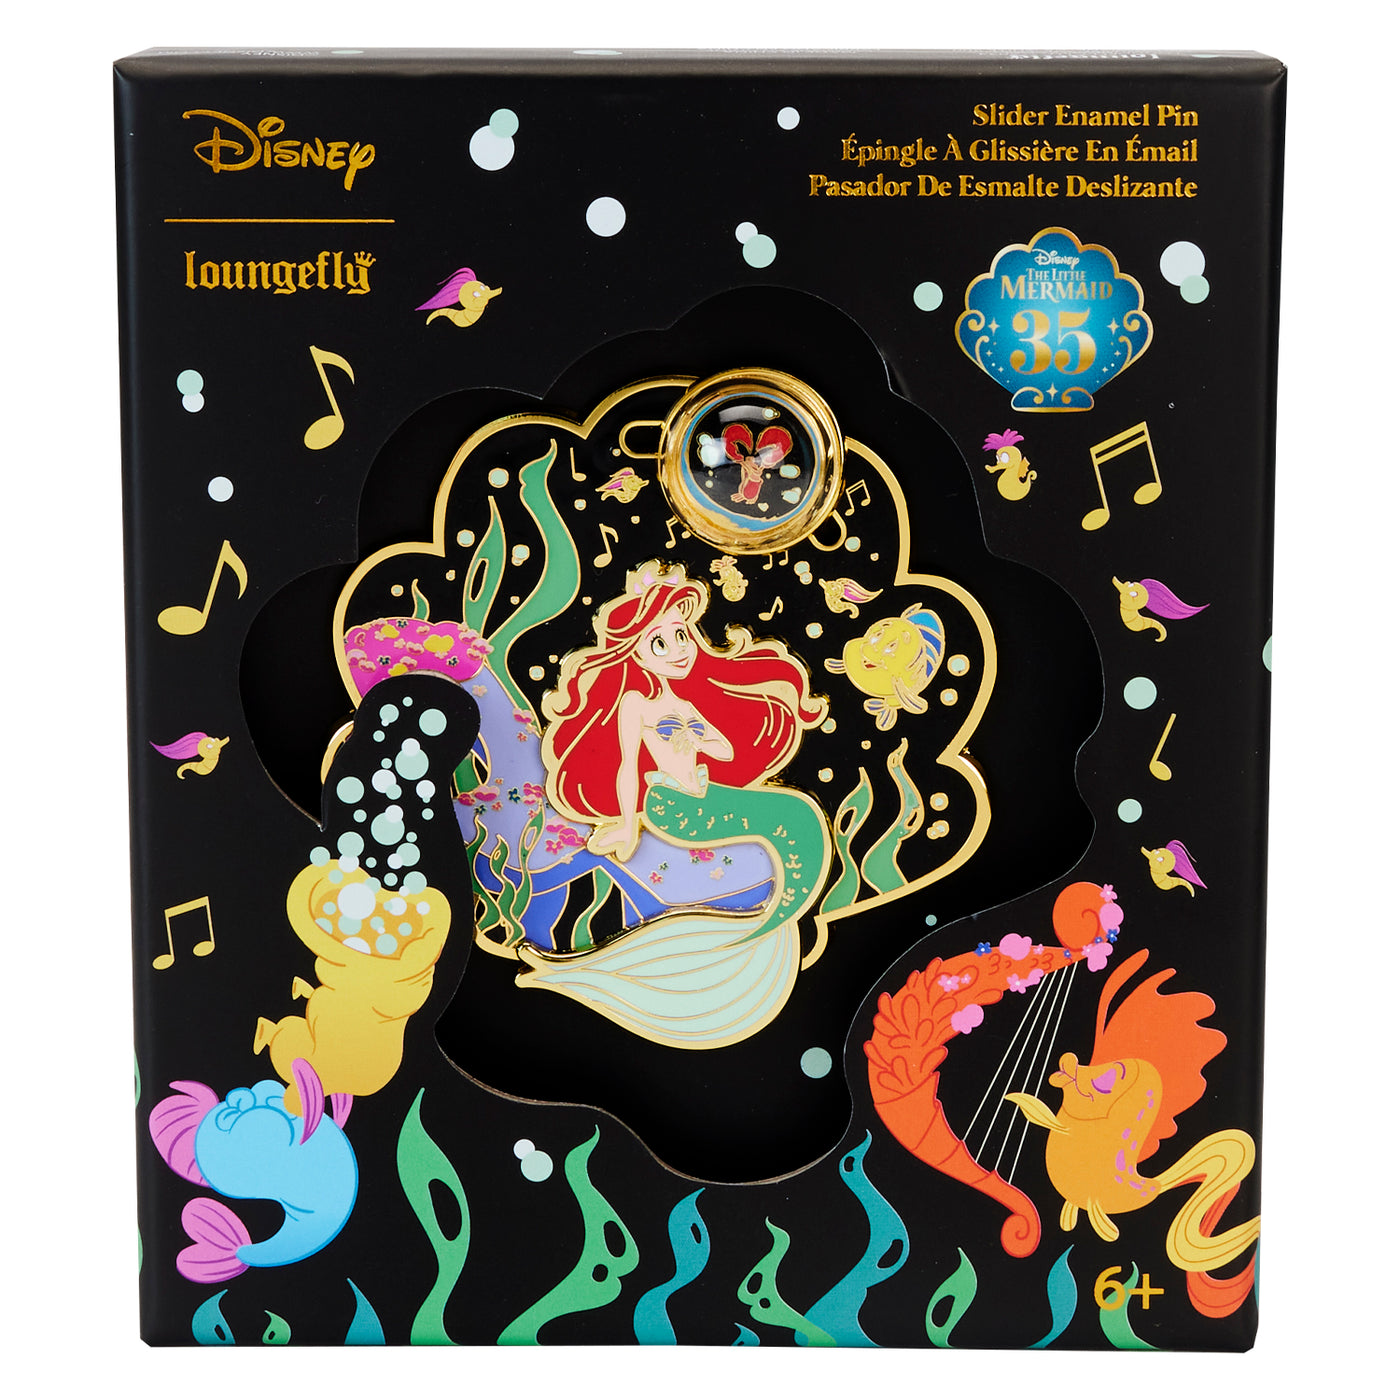 Loungefly Disney The Little Mermaid 35th Anniversary 3" Collector's Box Pin Limited Edition